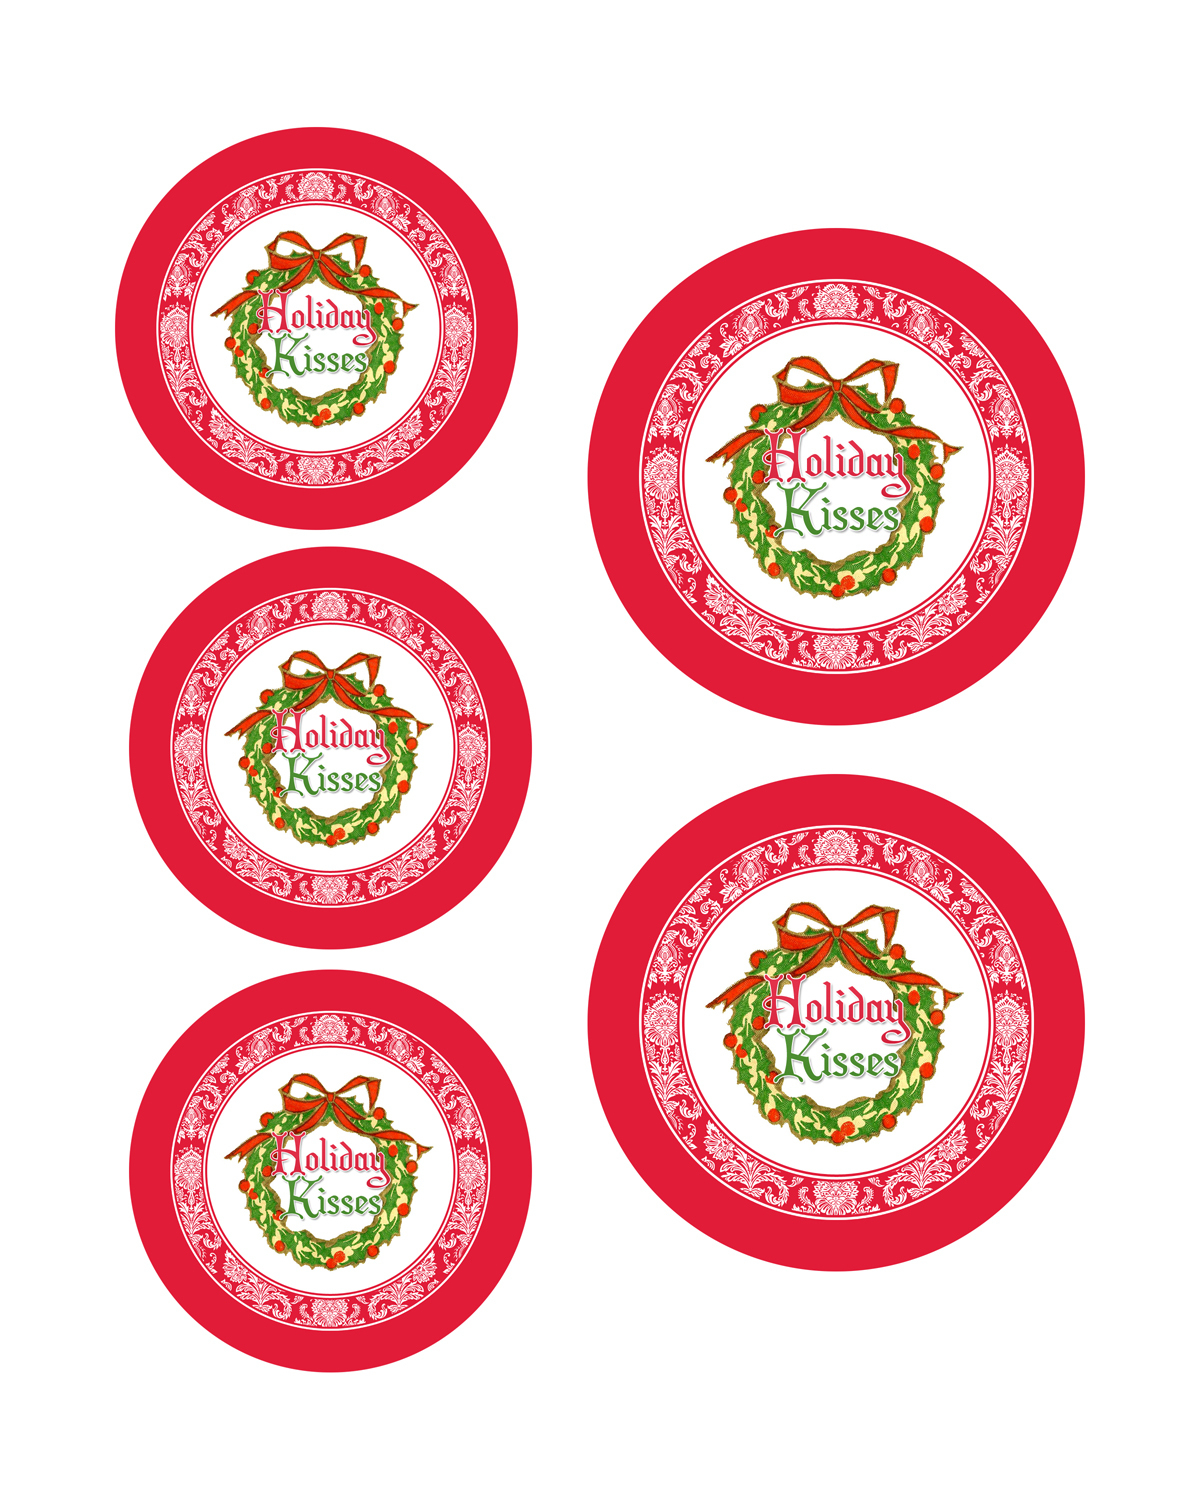 Printable Candy Jar Labels For The Holidays - The Graphics Fairy - Free Printable Jar Labels Christmas